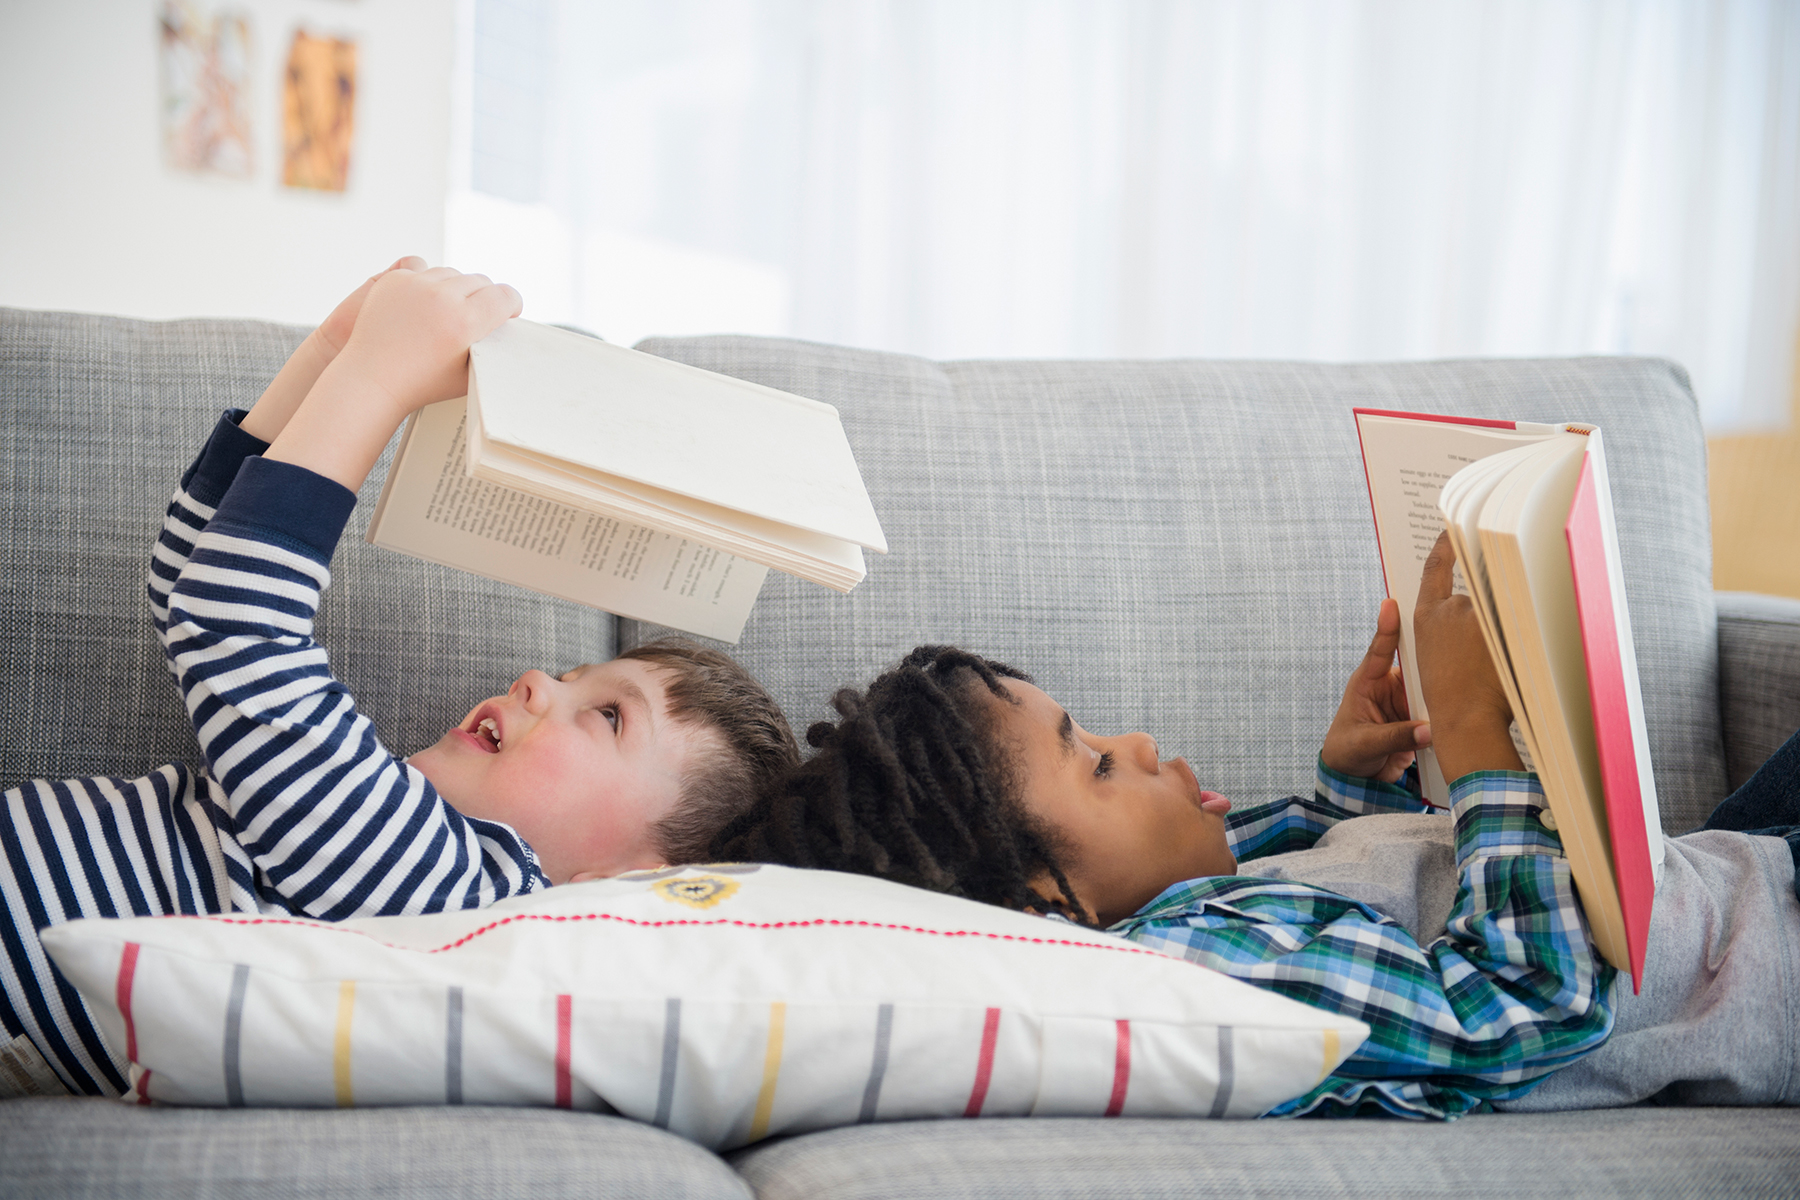 A photo to two young boys laying down on a sofa and reading books together